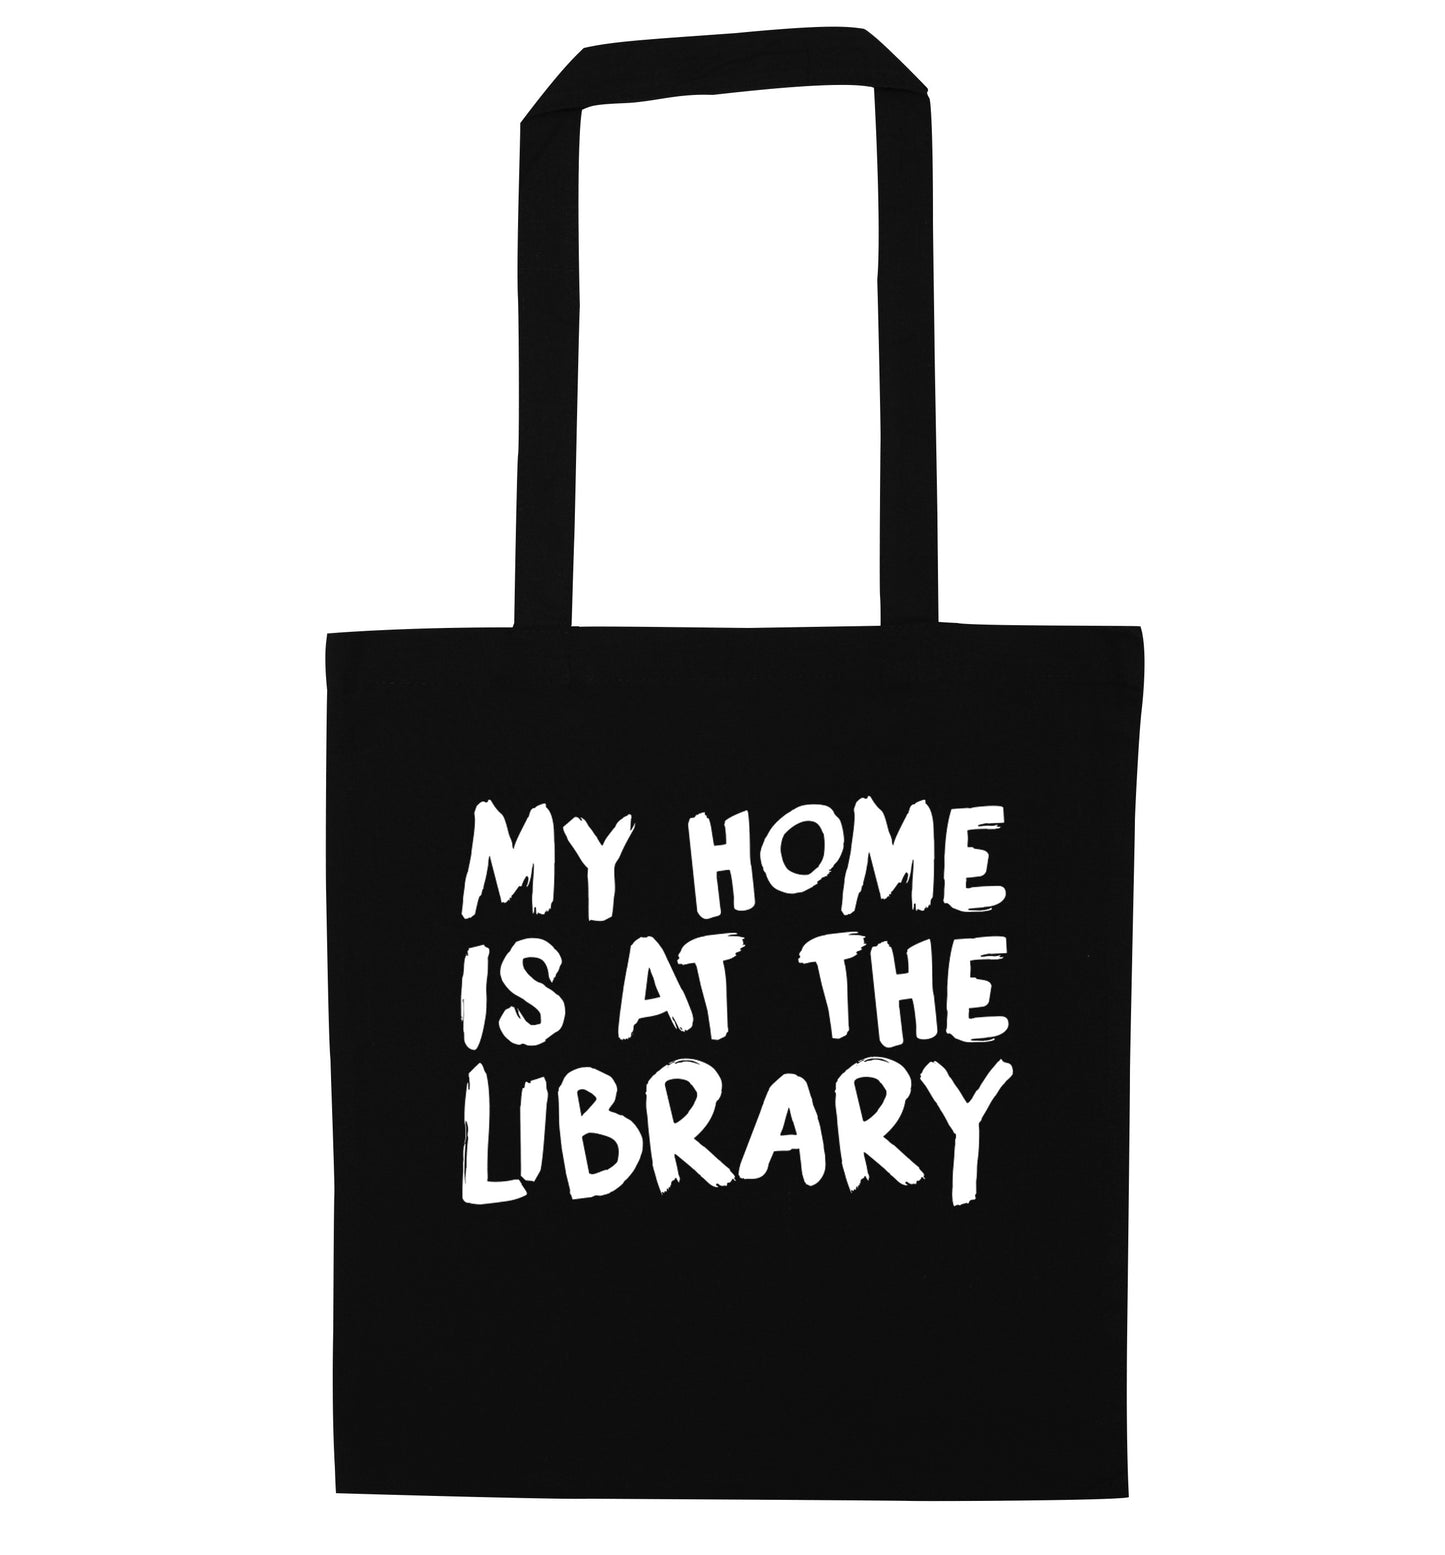 My home is at the library black tote bag